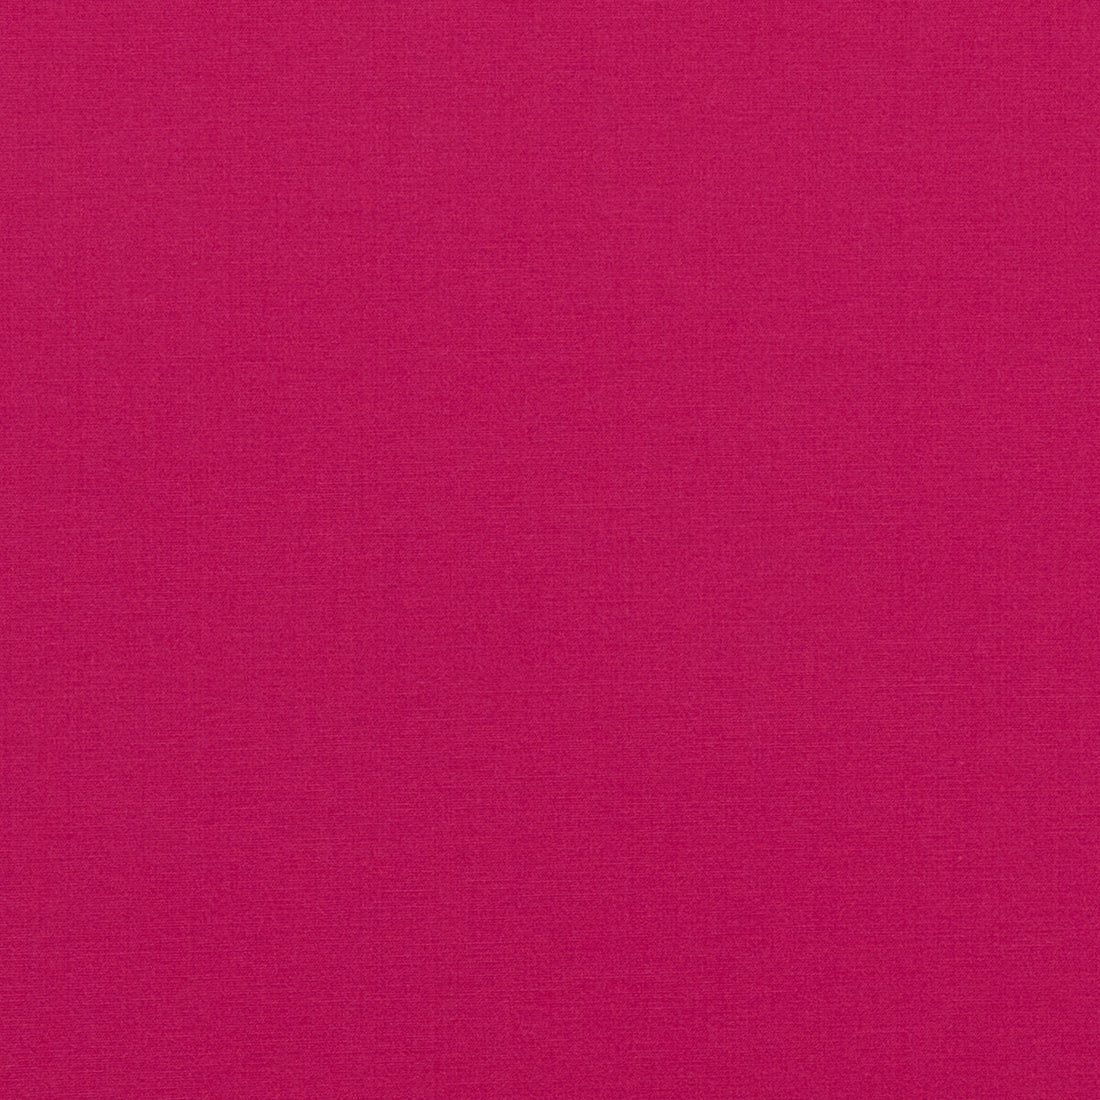 Pavilion fabric in fuchsia color - pattern PF50478.410.0 - by Baker Lifestyle in the Pavilion - Blegrave Notebook collection